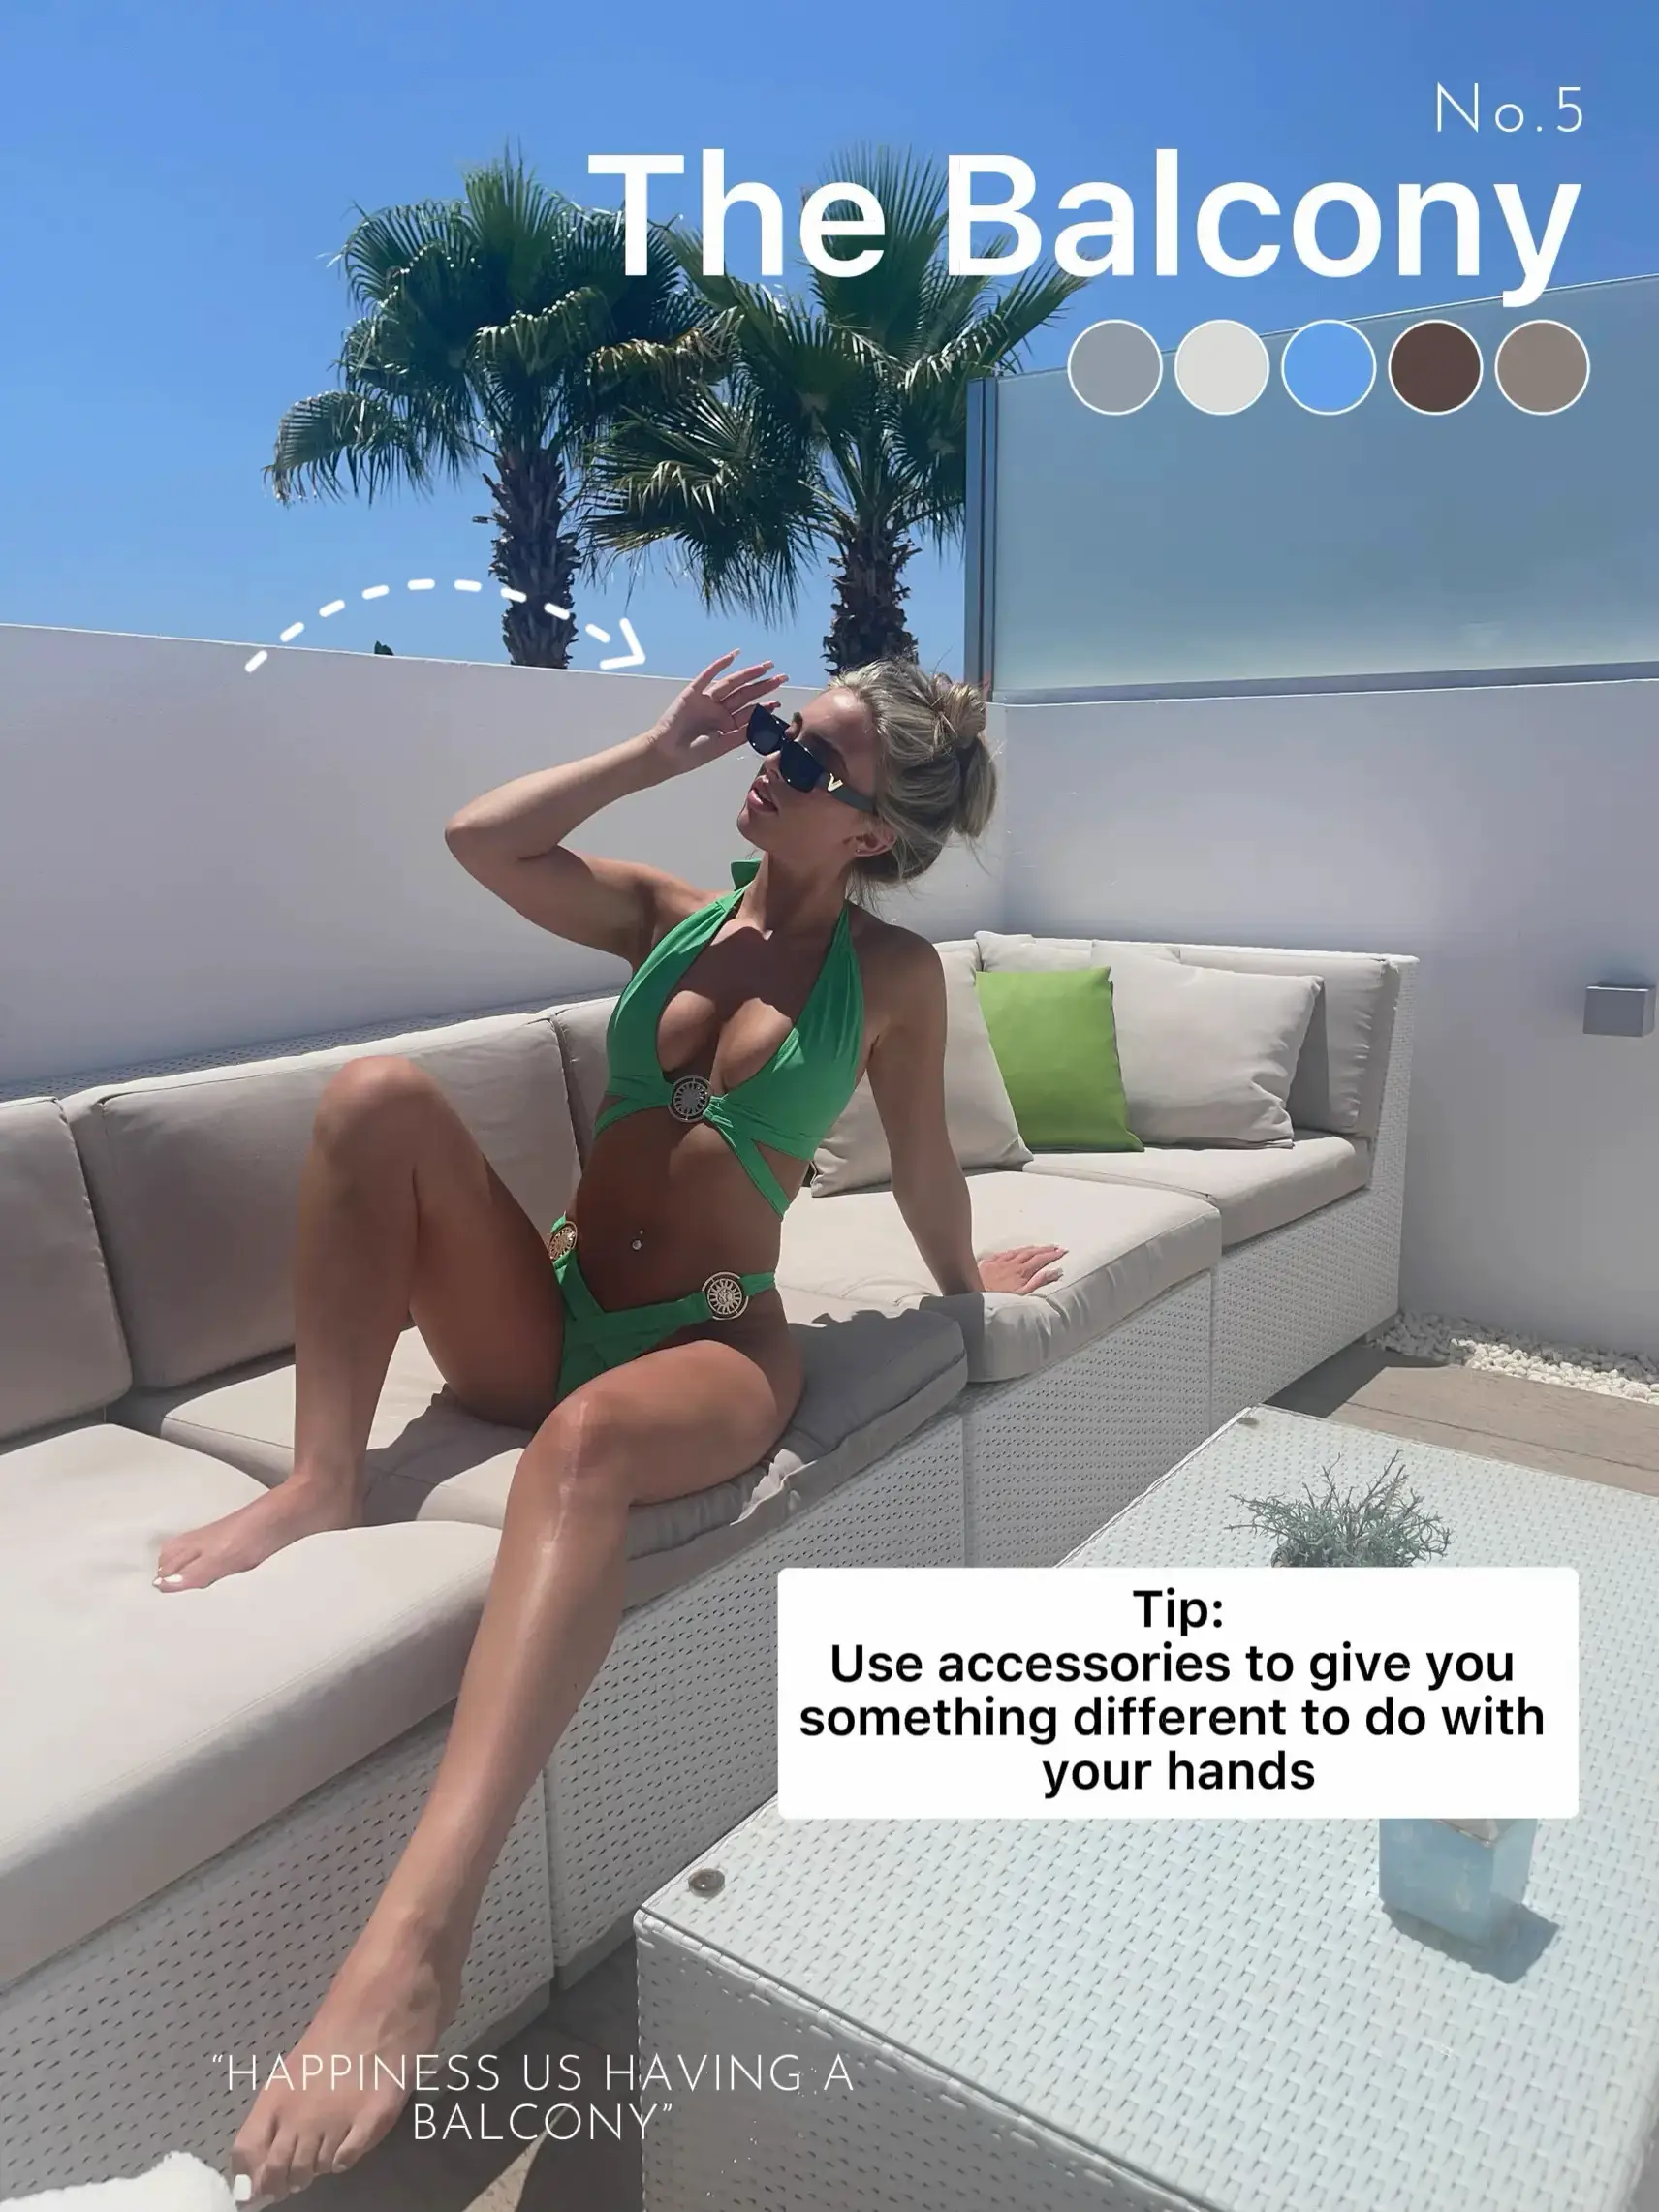  A woman in a green bikini is sitting on a couch.